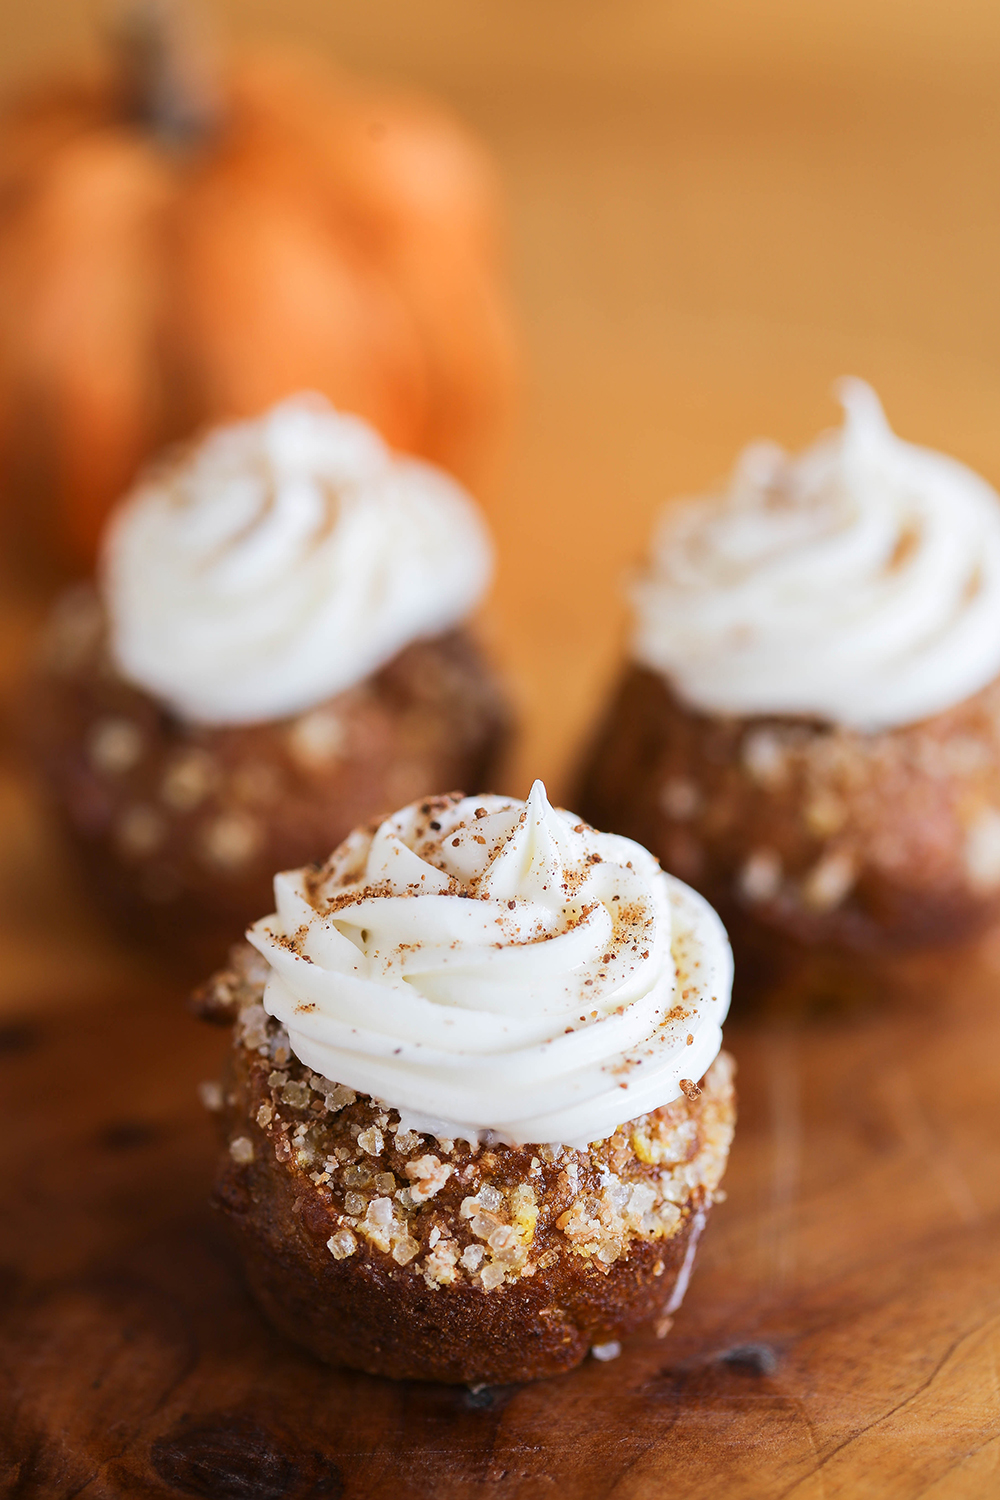 Miniature pumpkin muffins from Start. Photo by Catherine Downes.